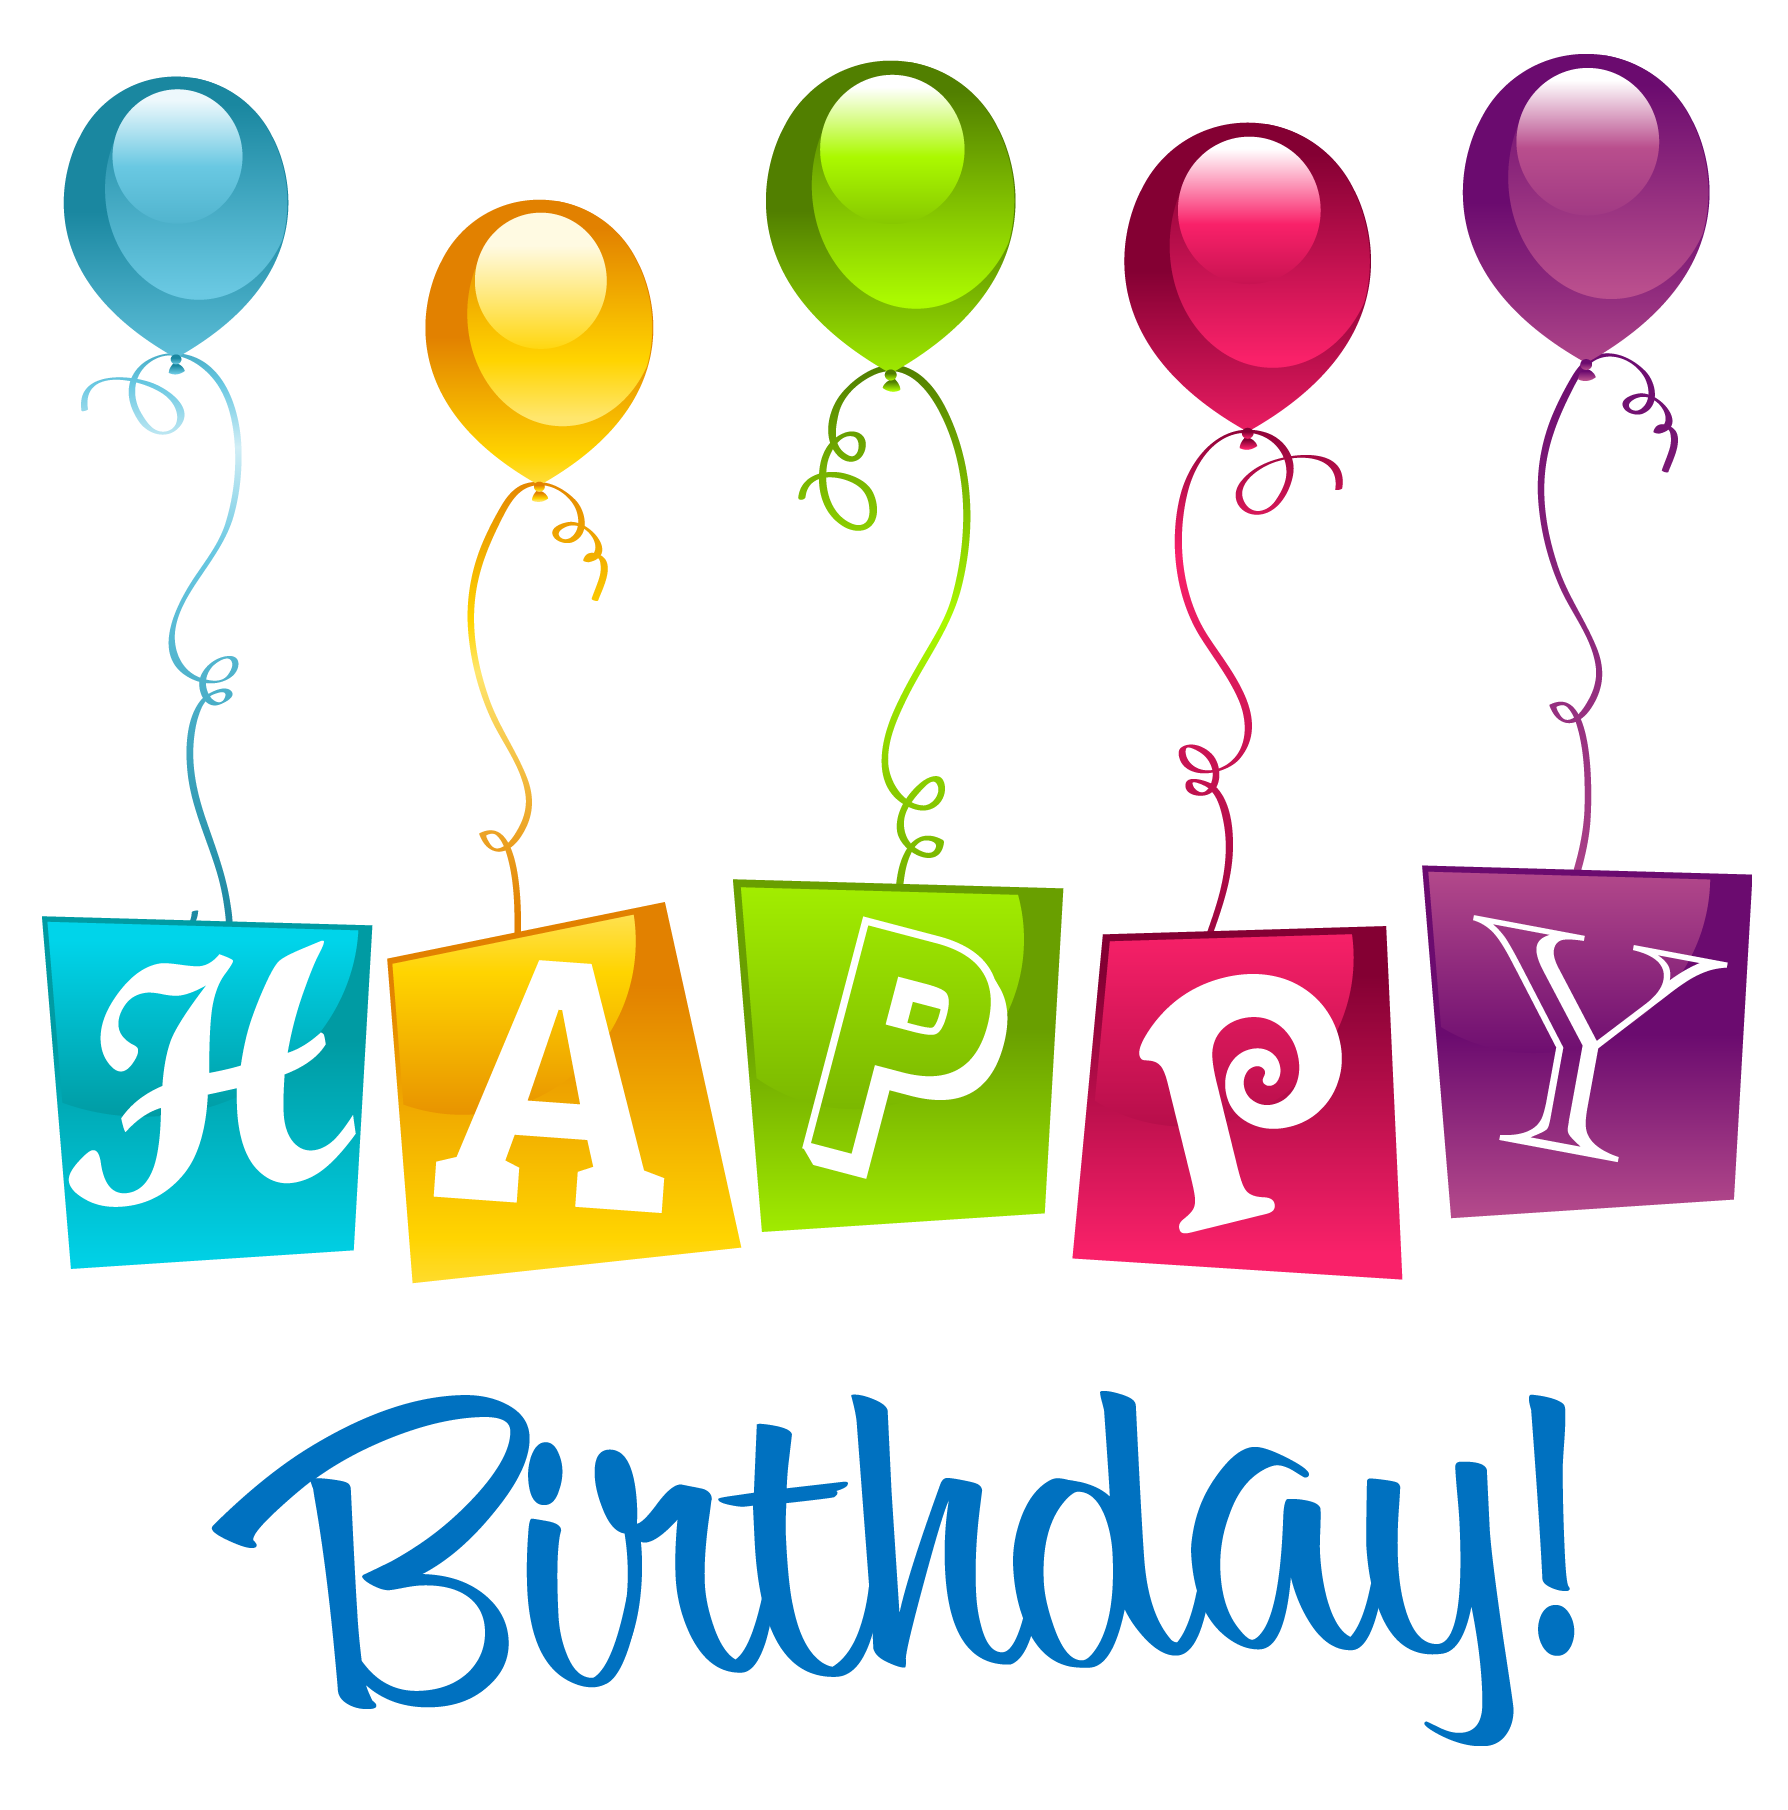 free clipart images happy birthday - photo #37